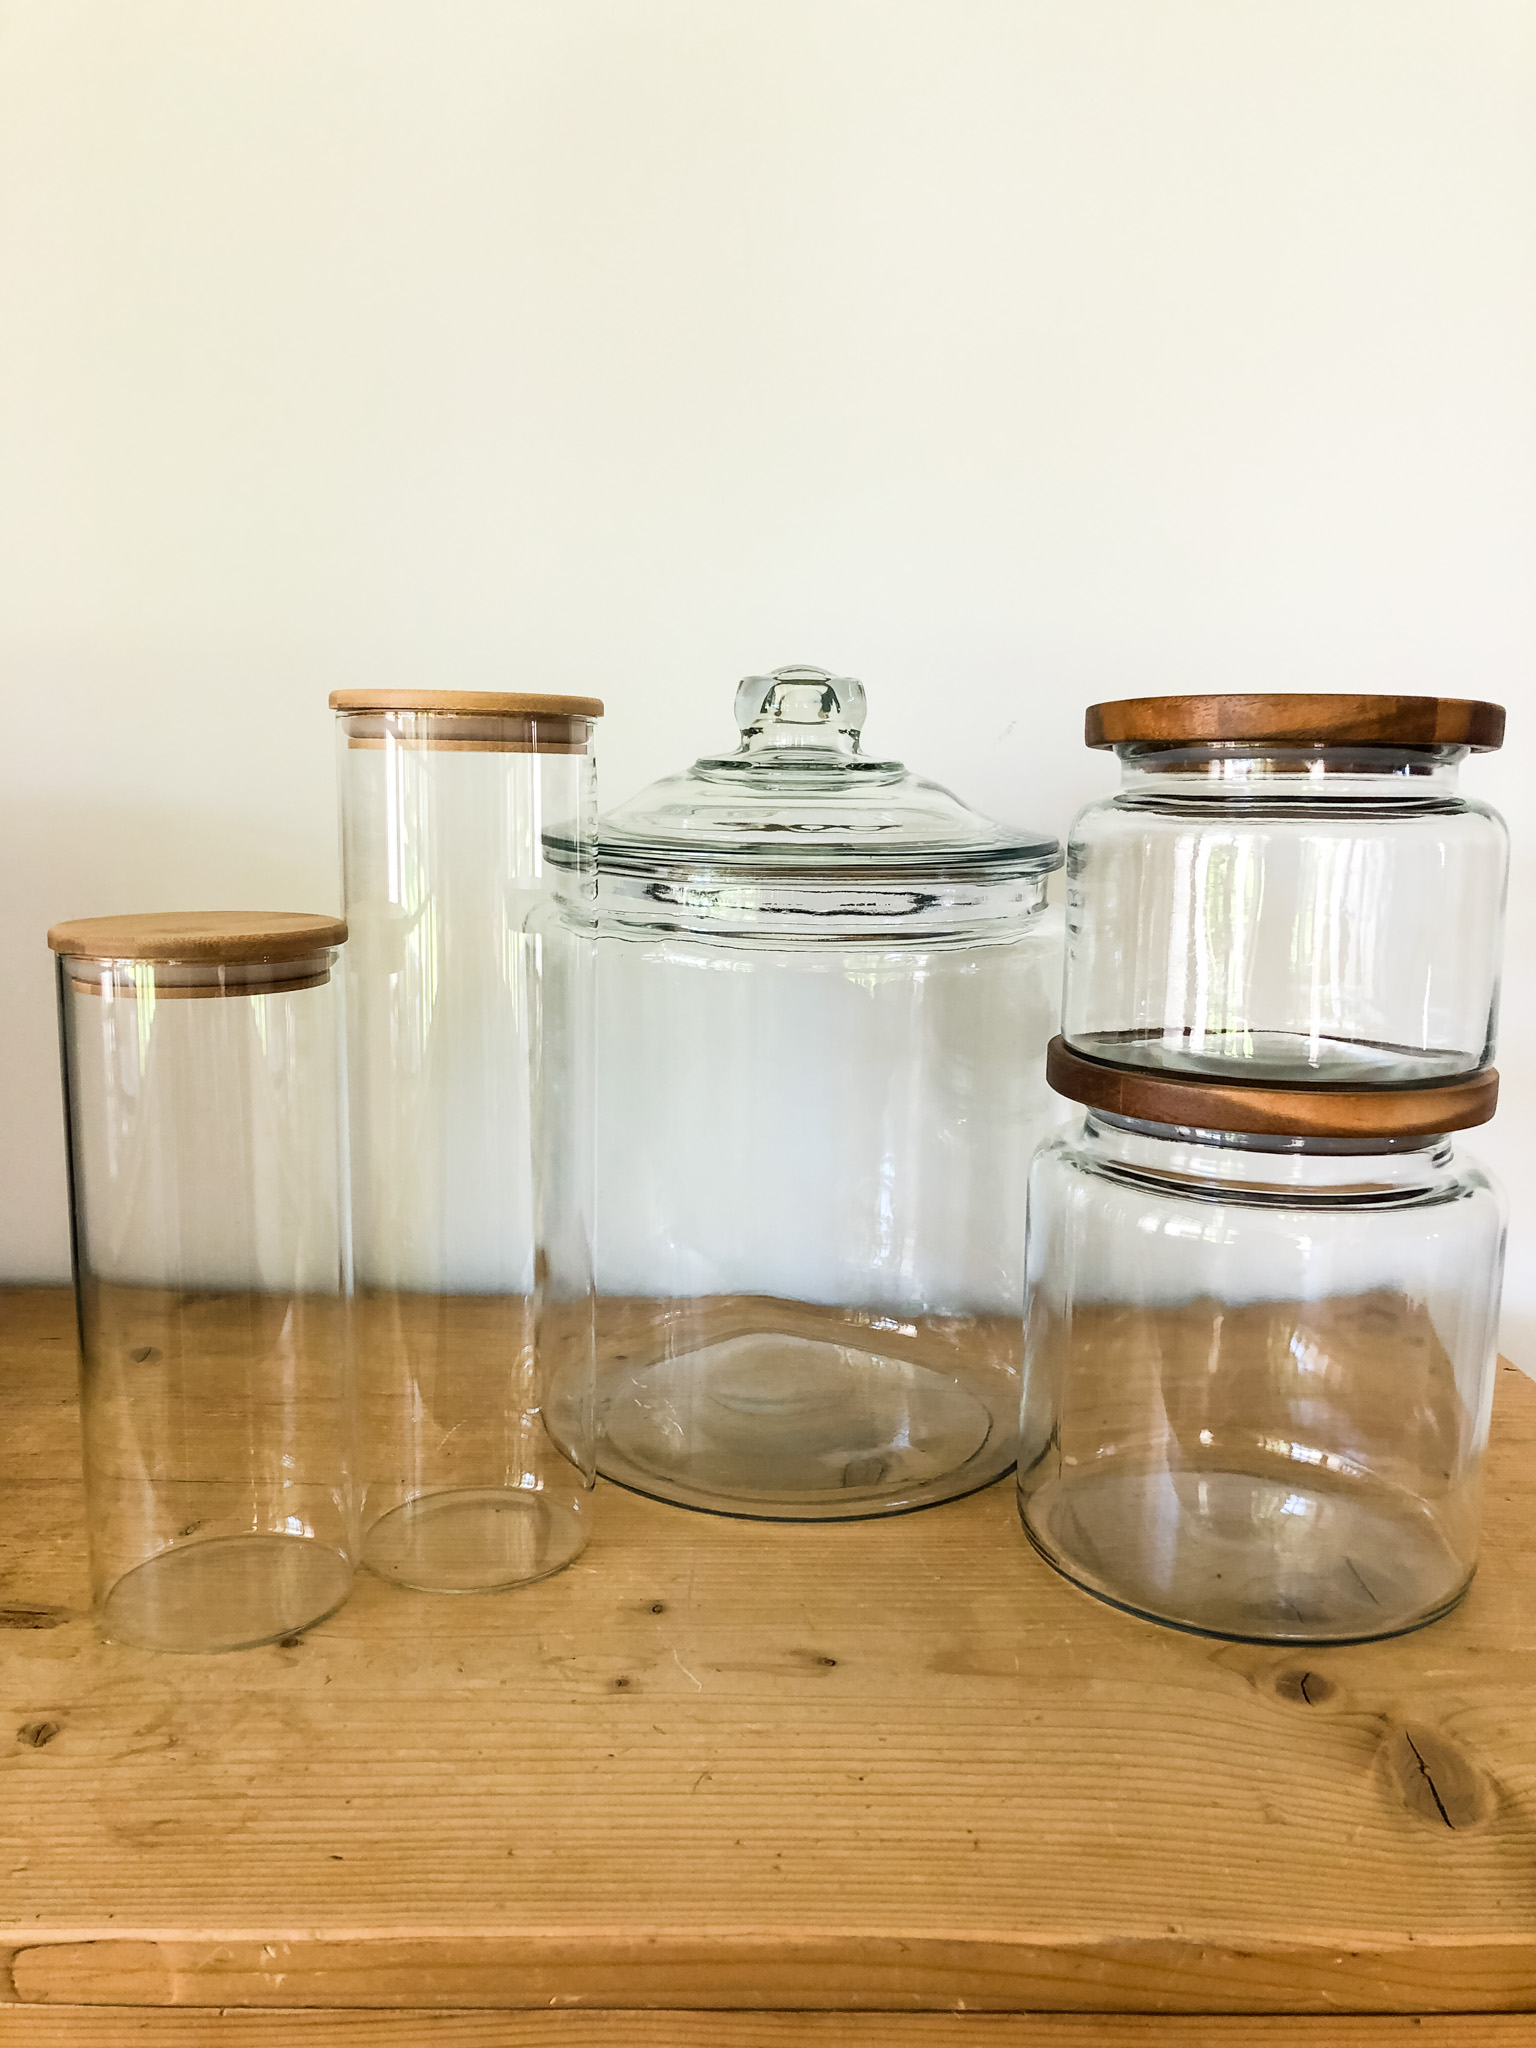 Five glass jars, four with wooden lids